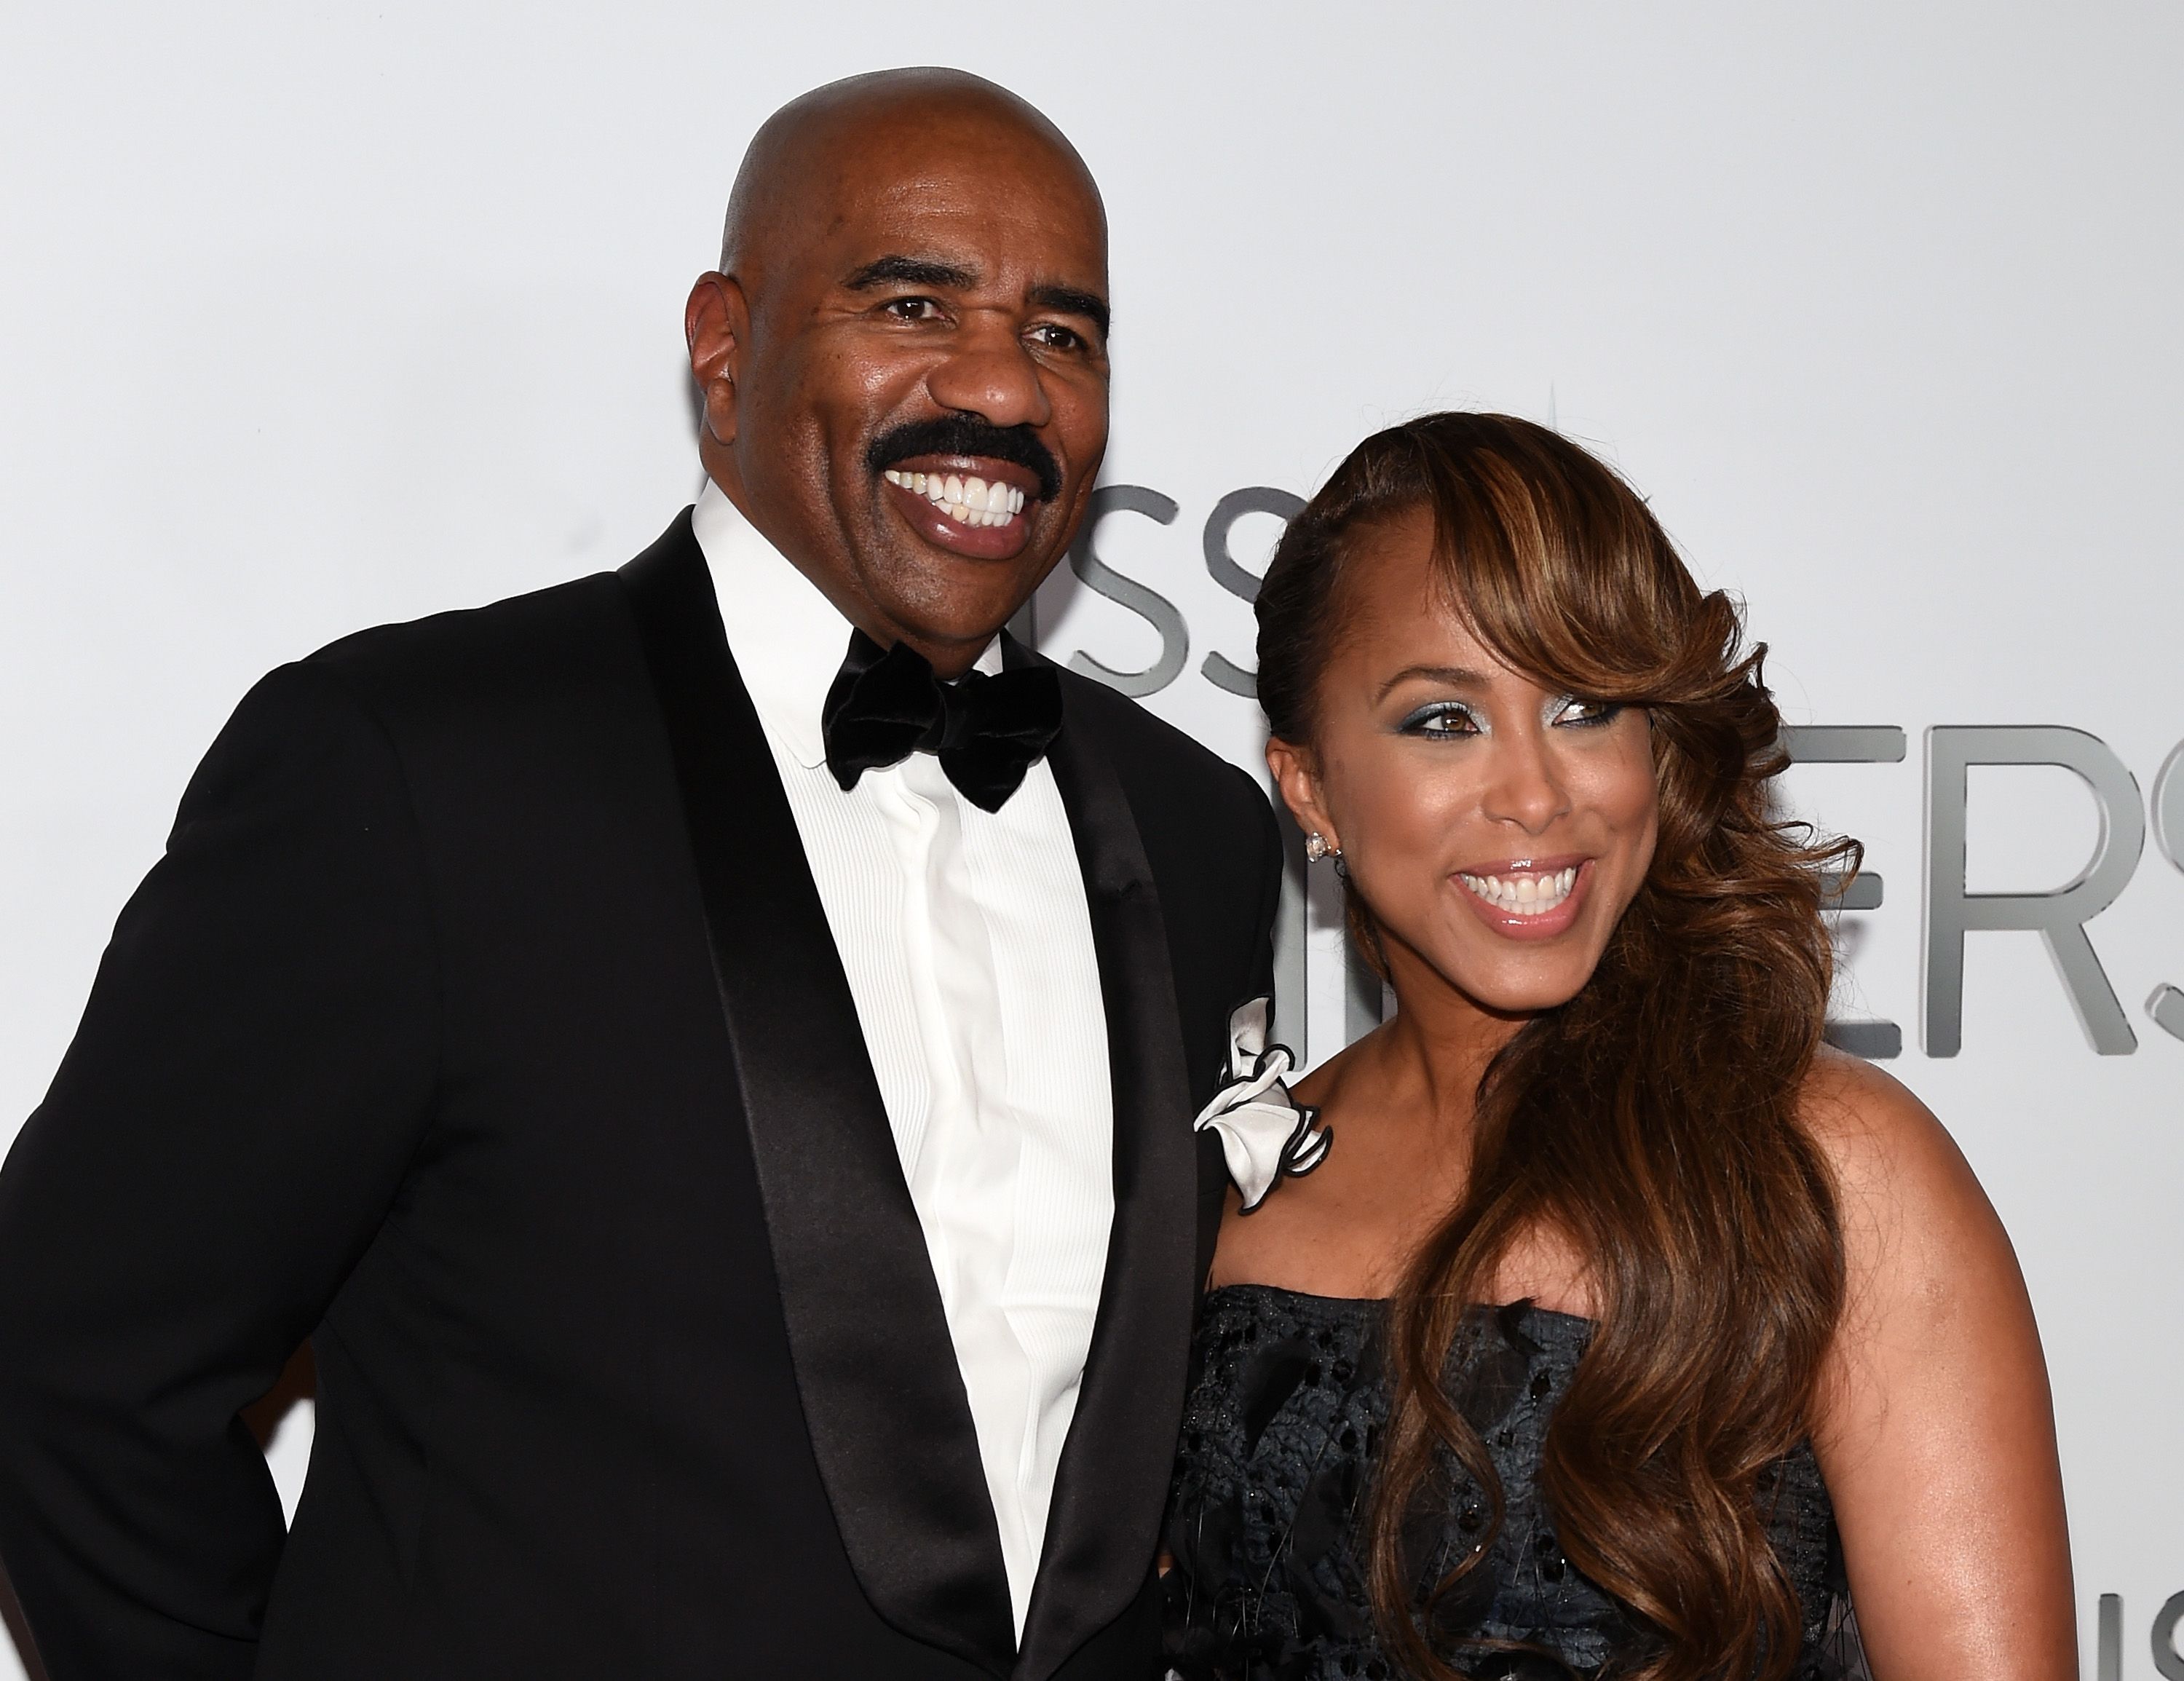 Steve Harvey and his wife Marjorie Harvey at the 2015 Miss Universe Pageant at Planet Hollywood Resort & Casino in Las Vegas on December 20, 2015  | Photo: Getty Images  